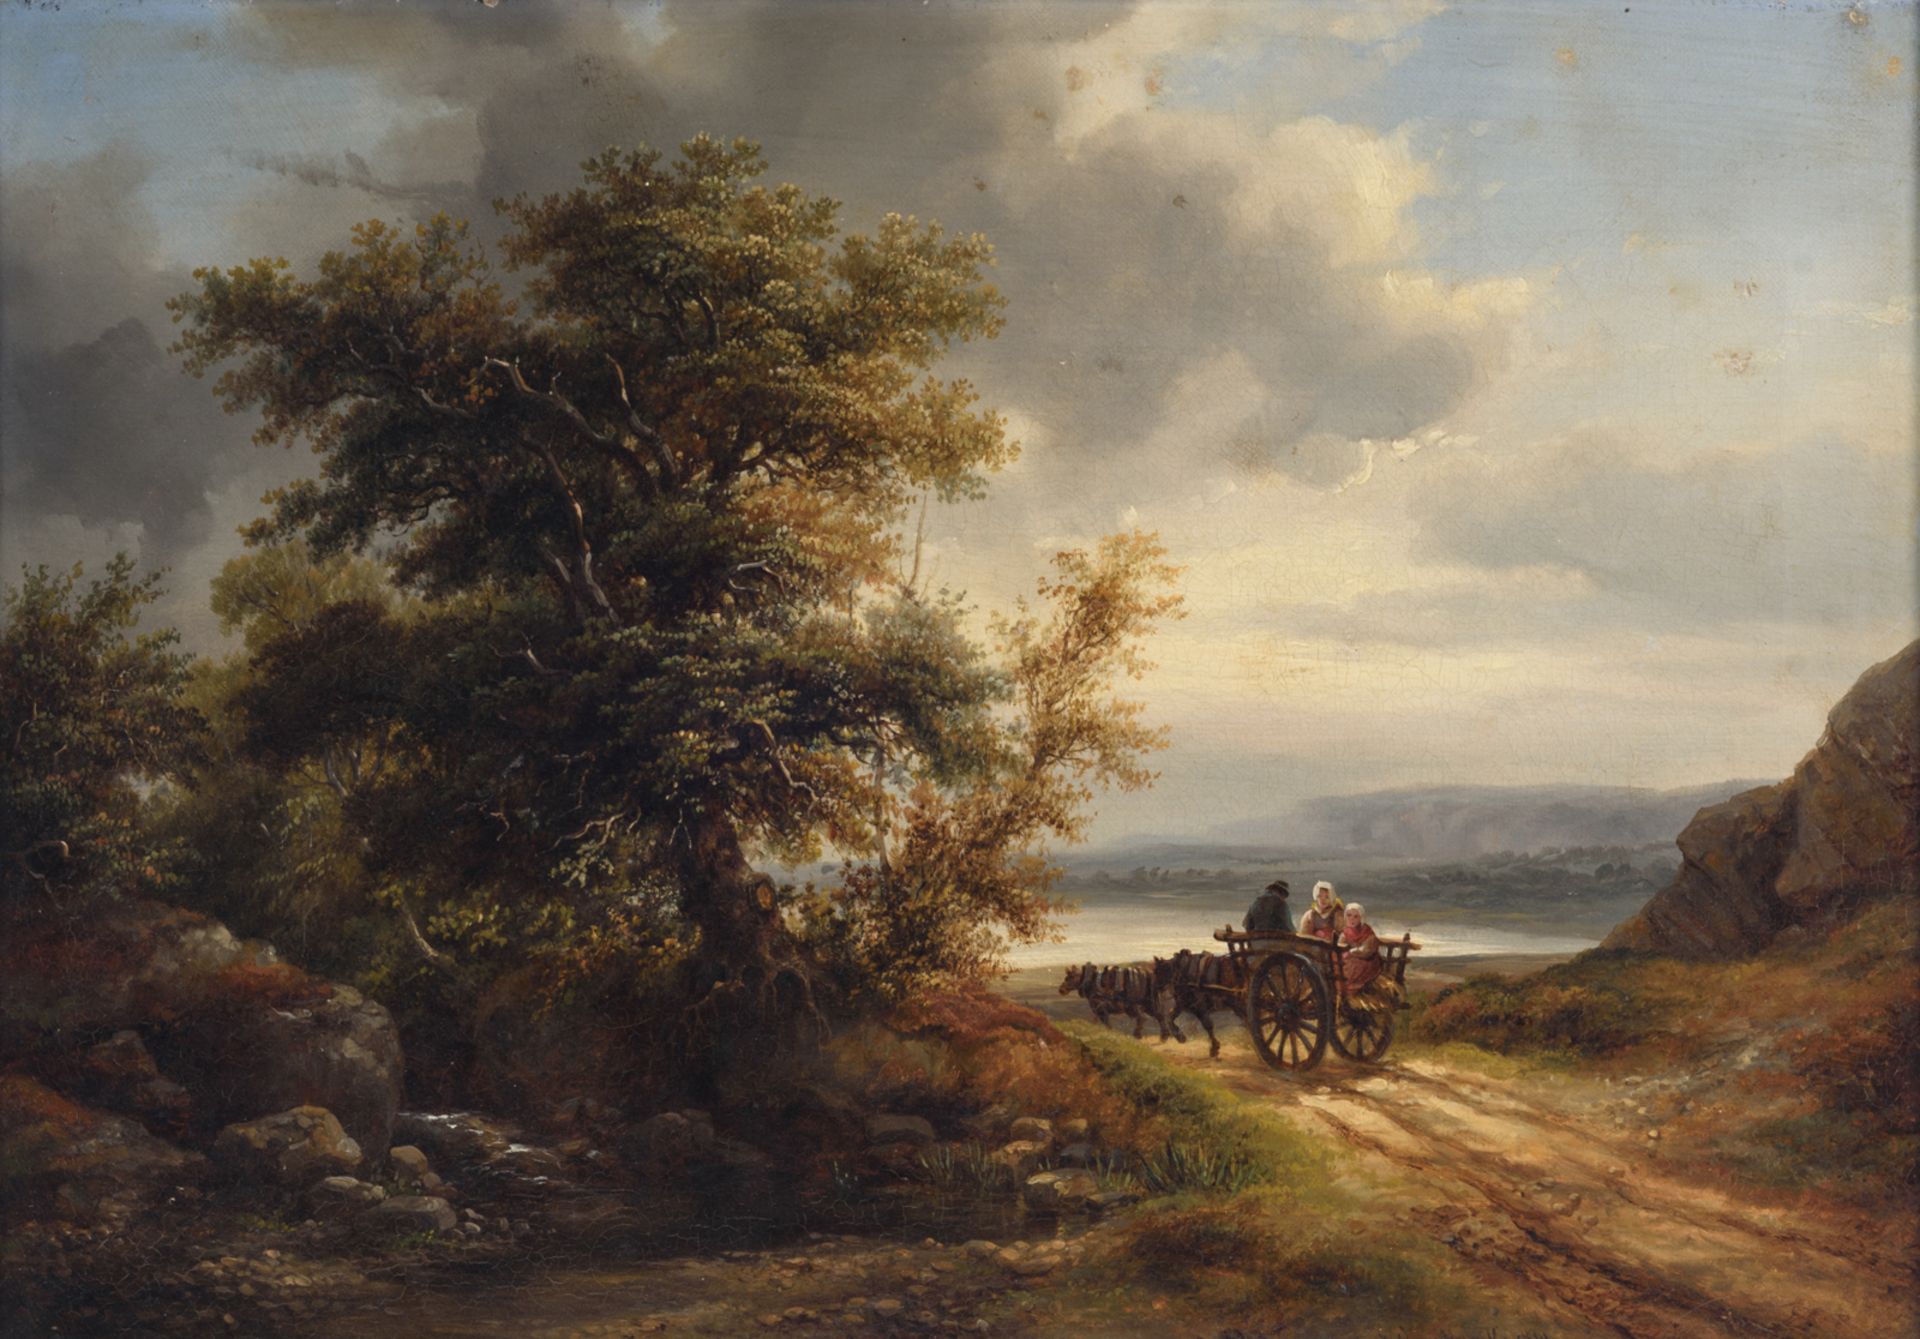 Van Marcke J., a wooded landscape with a horse-drawn carriage, dated 1841, oil on canvas, 33 x 46 cm